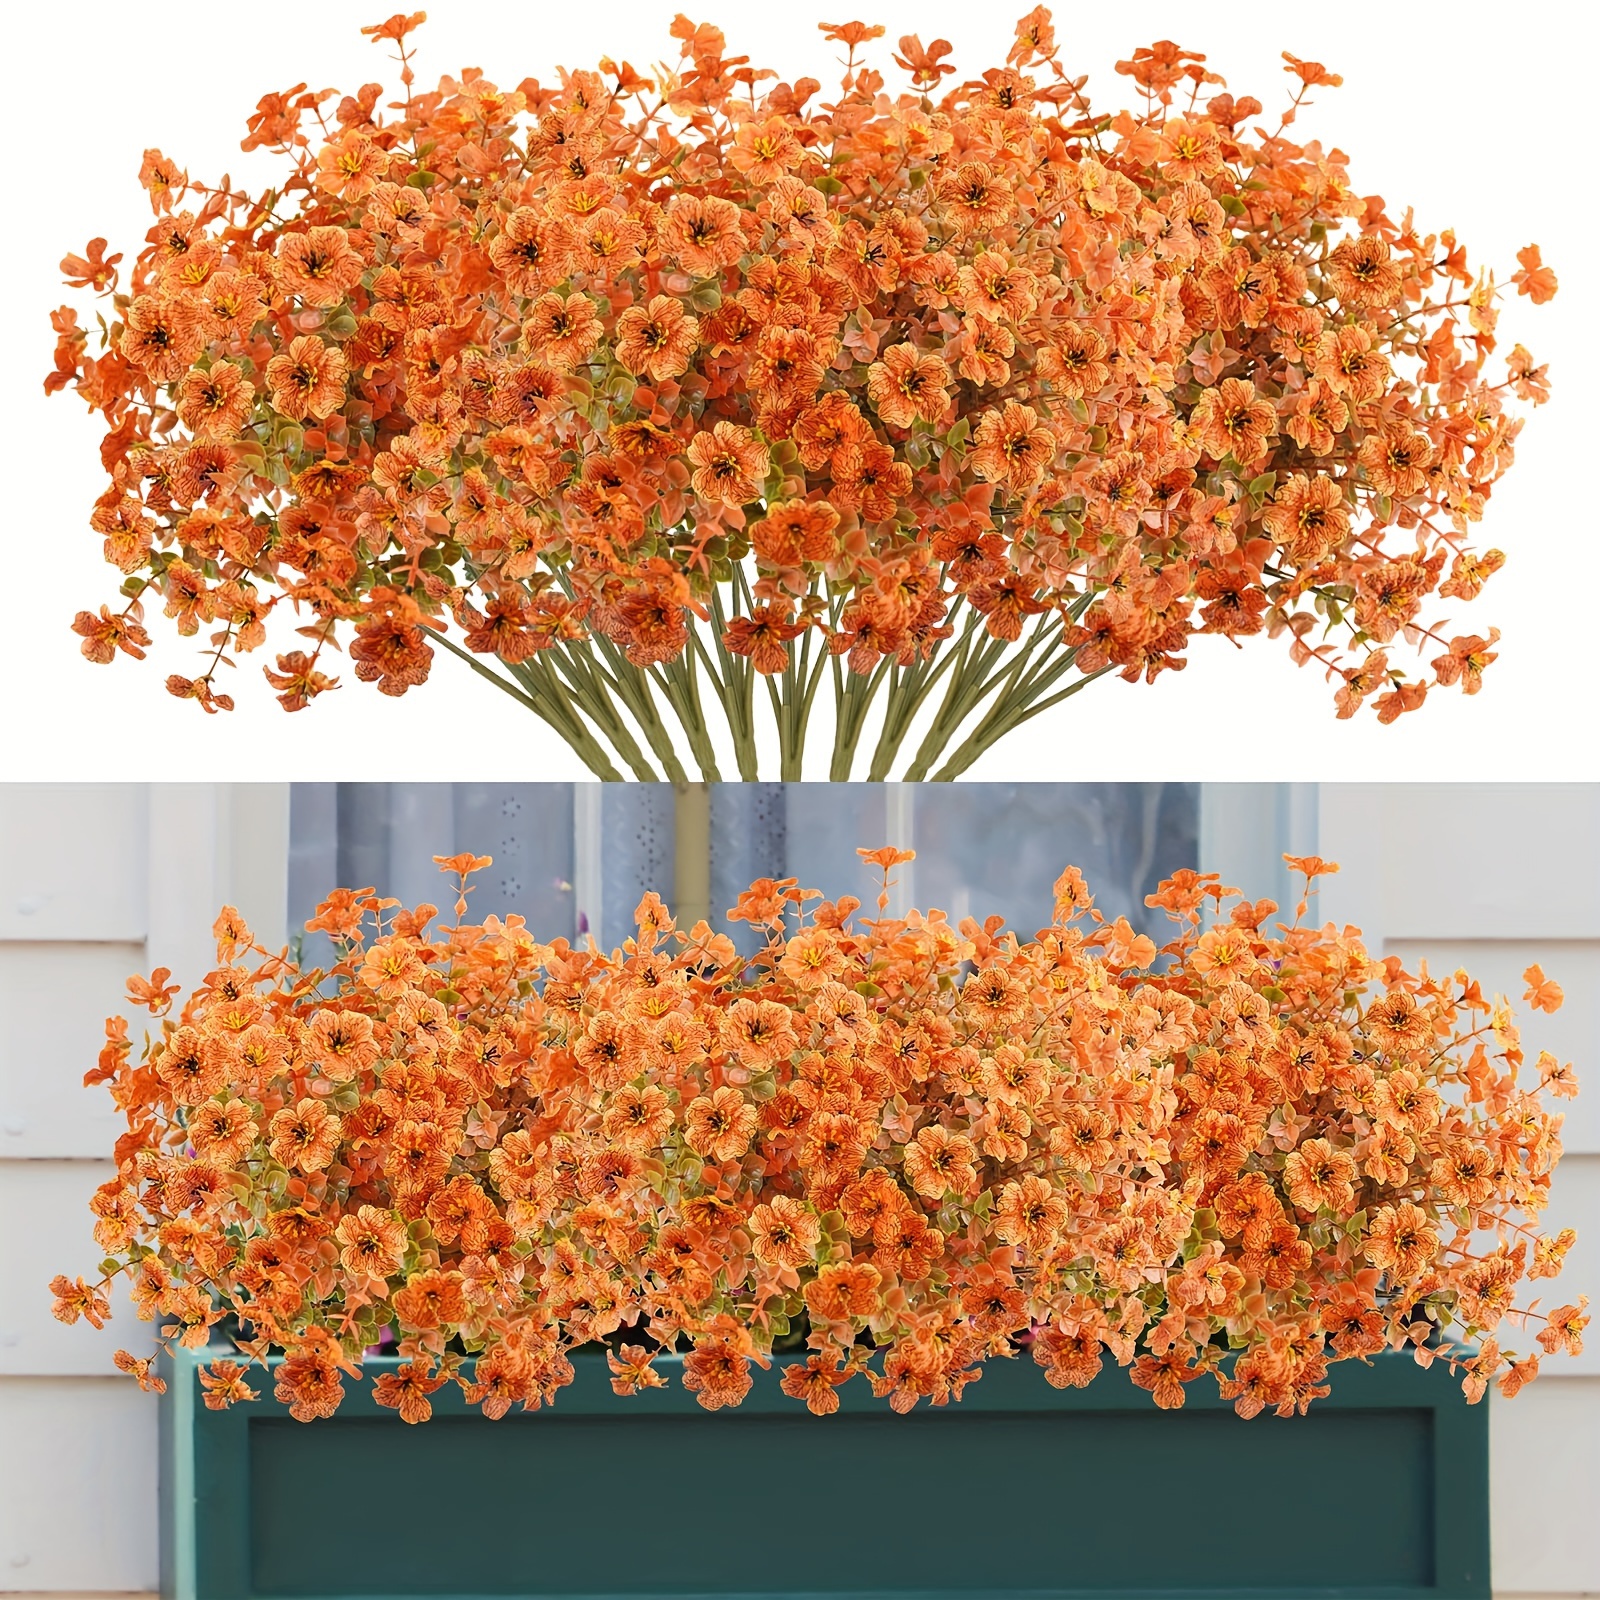 

4/8 Bundles Uv Resistant Autumn Colors Eucalyptus Leaves, Cloth Flowers, Violets, And Sunset Flowers - Indoor/outdoor Hanging Plant For Home Garden Decor